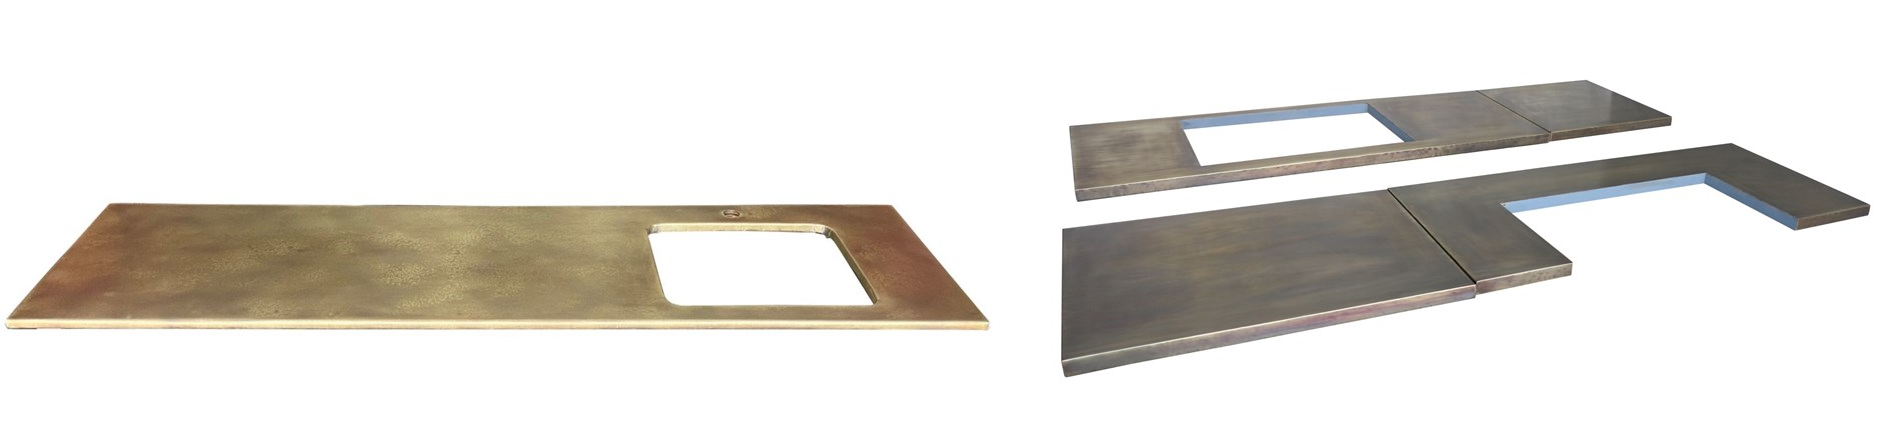 Brass Worktops For Your Kitchen Bar Or Pub For Sale Online at UKAA